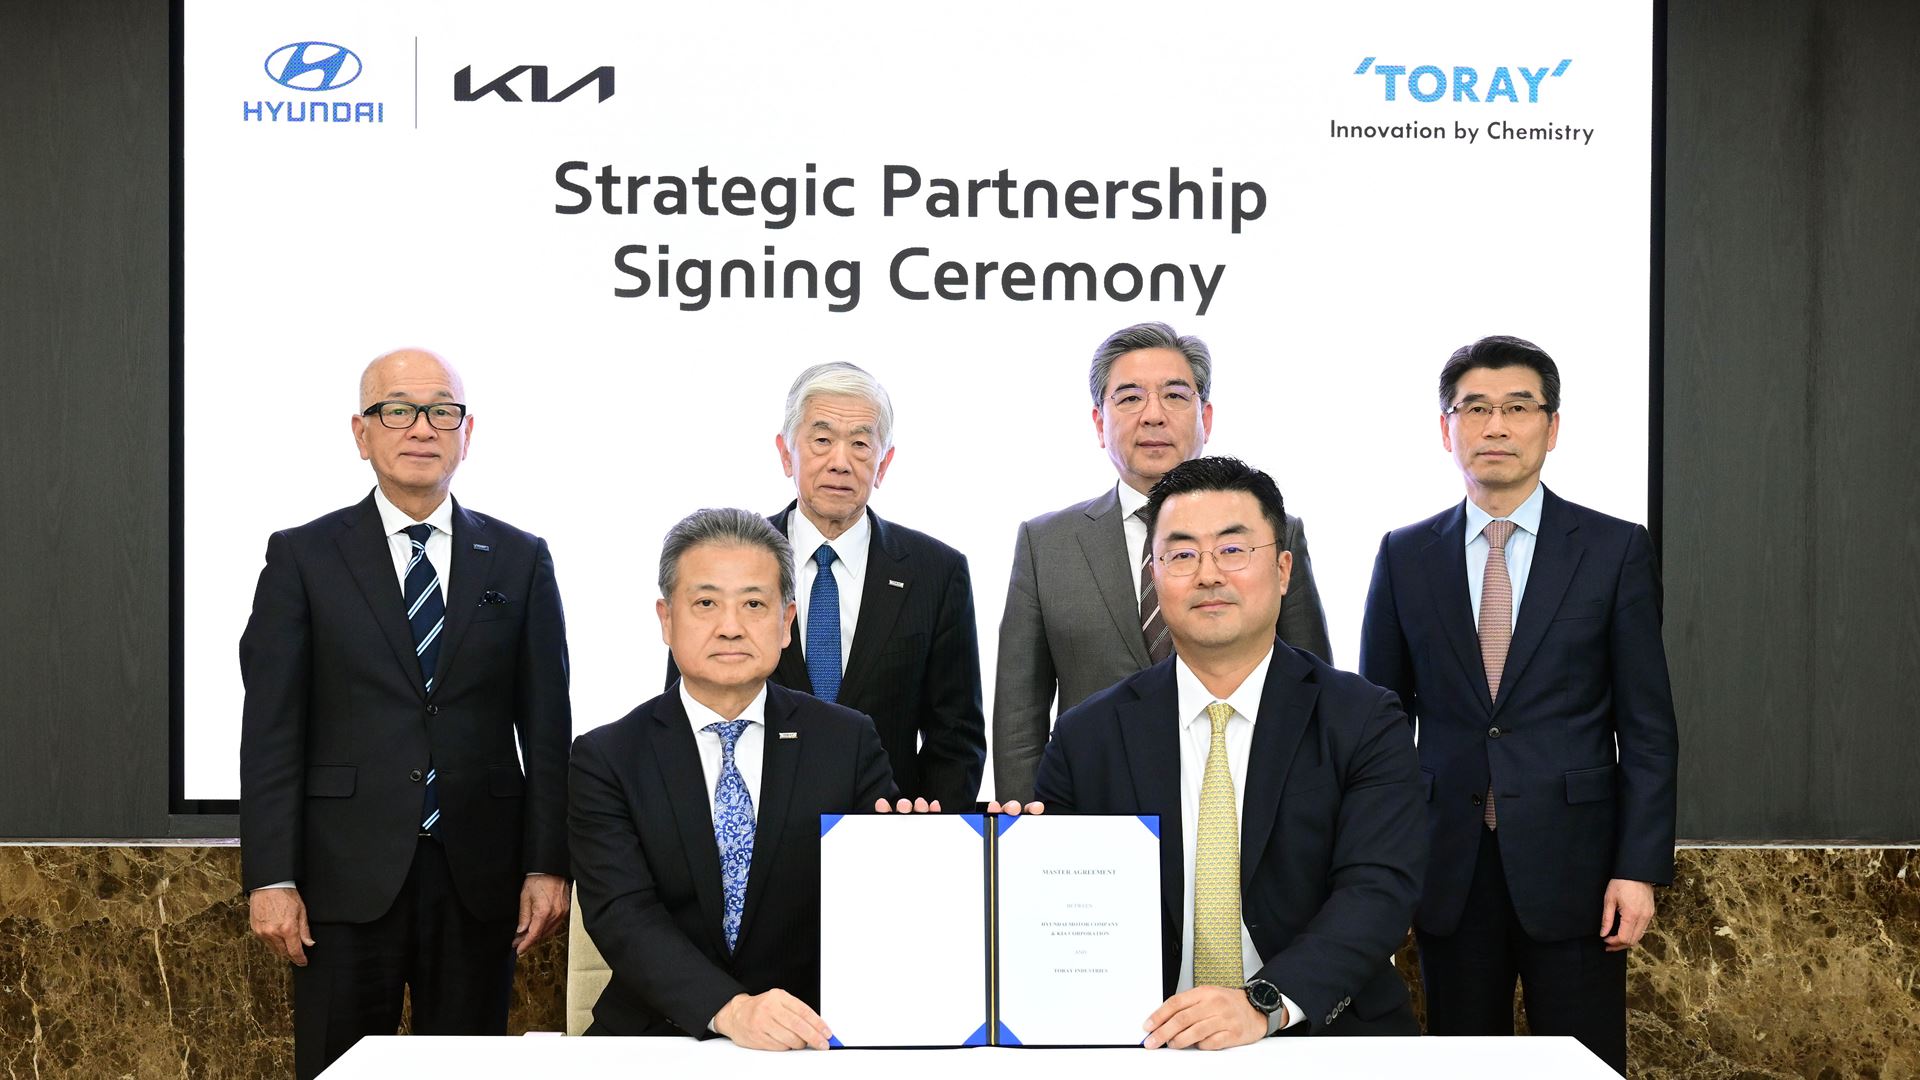 Hyundai Motor Group has signed an agreement for strategic cooperation with Toray Industries Inc